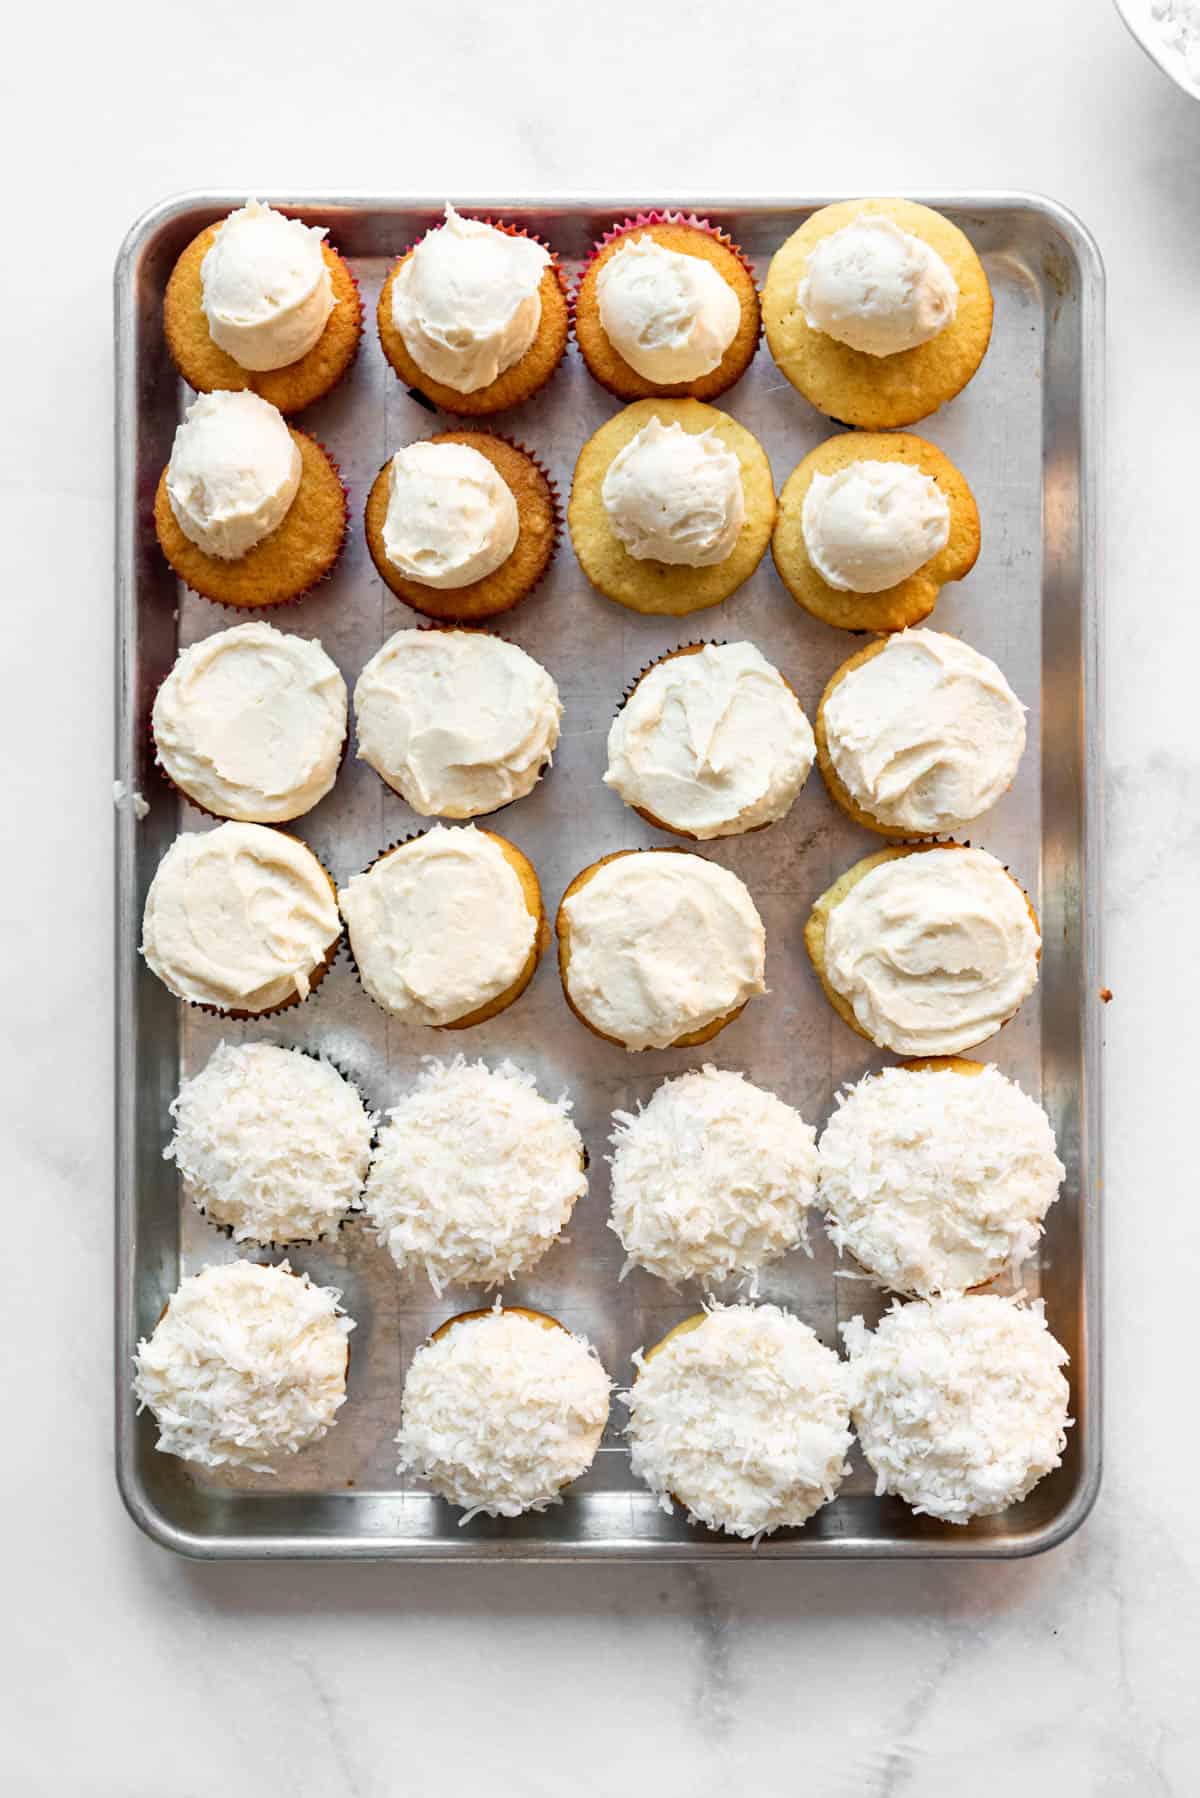 Coconut cupcakes on a baking sheet in various stages of being decorated with frosting and coconut.